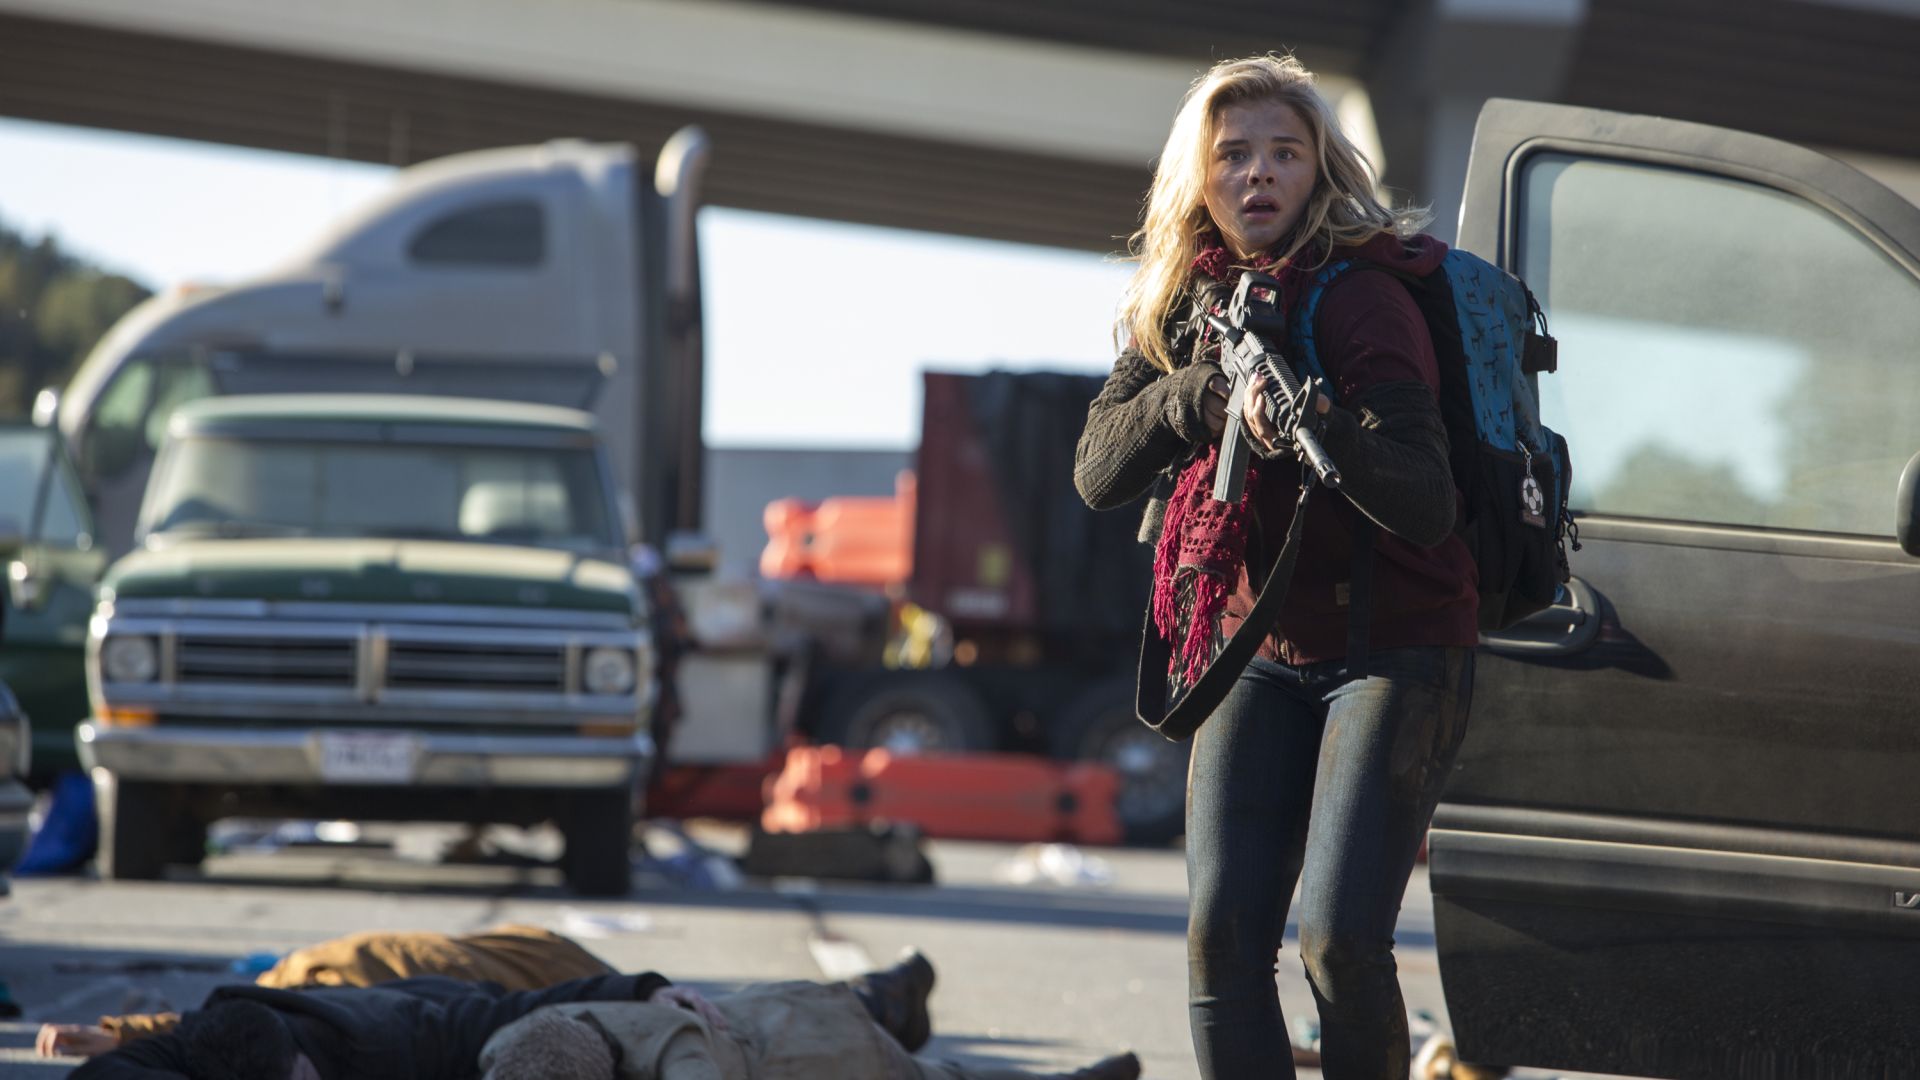 Download The 5th wave Best movies Chloe Moretz Wallpaper